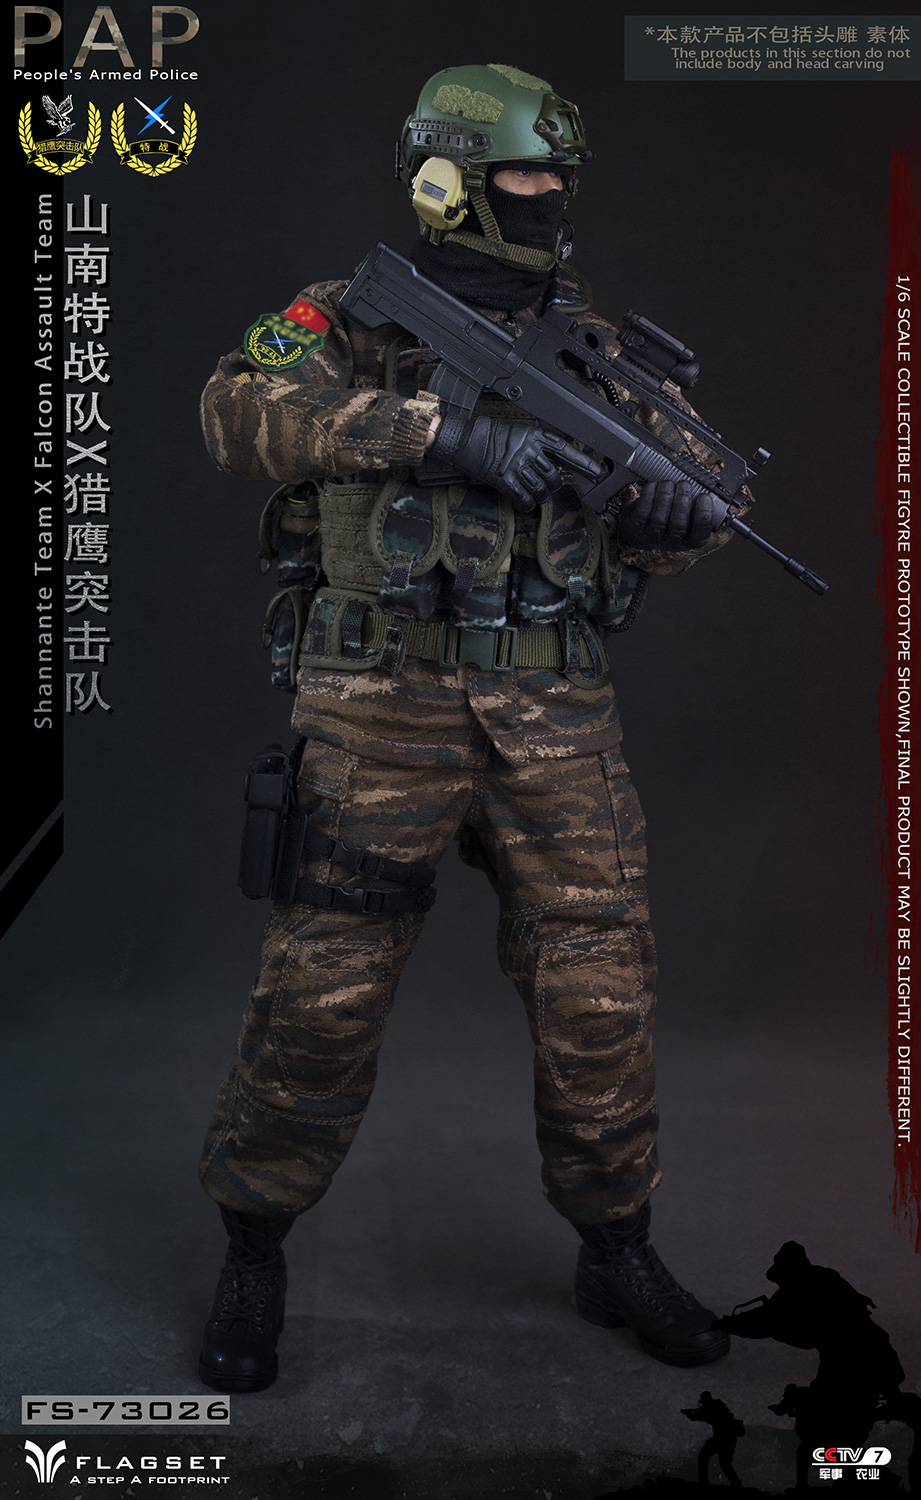 ArmedPolice - NEW PRODUCT: Flagset: 1/6 Chinese armed police special team - Shannan detachment / Falcon commando Wudong camouflage suit (FS73026#) 01104410